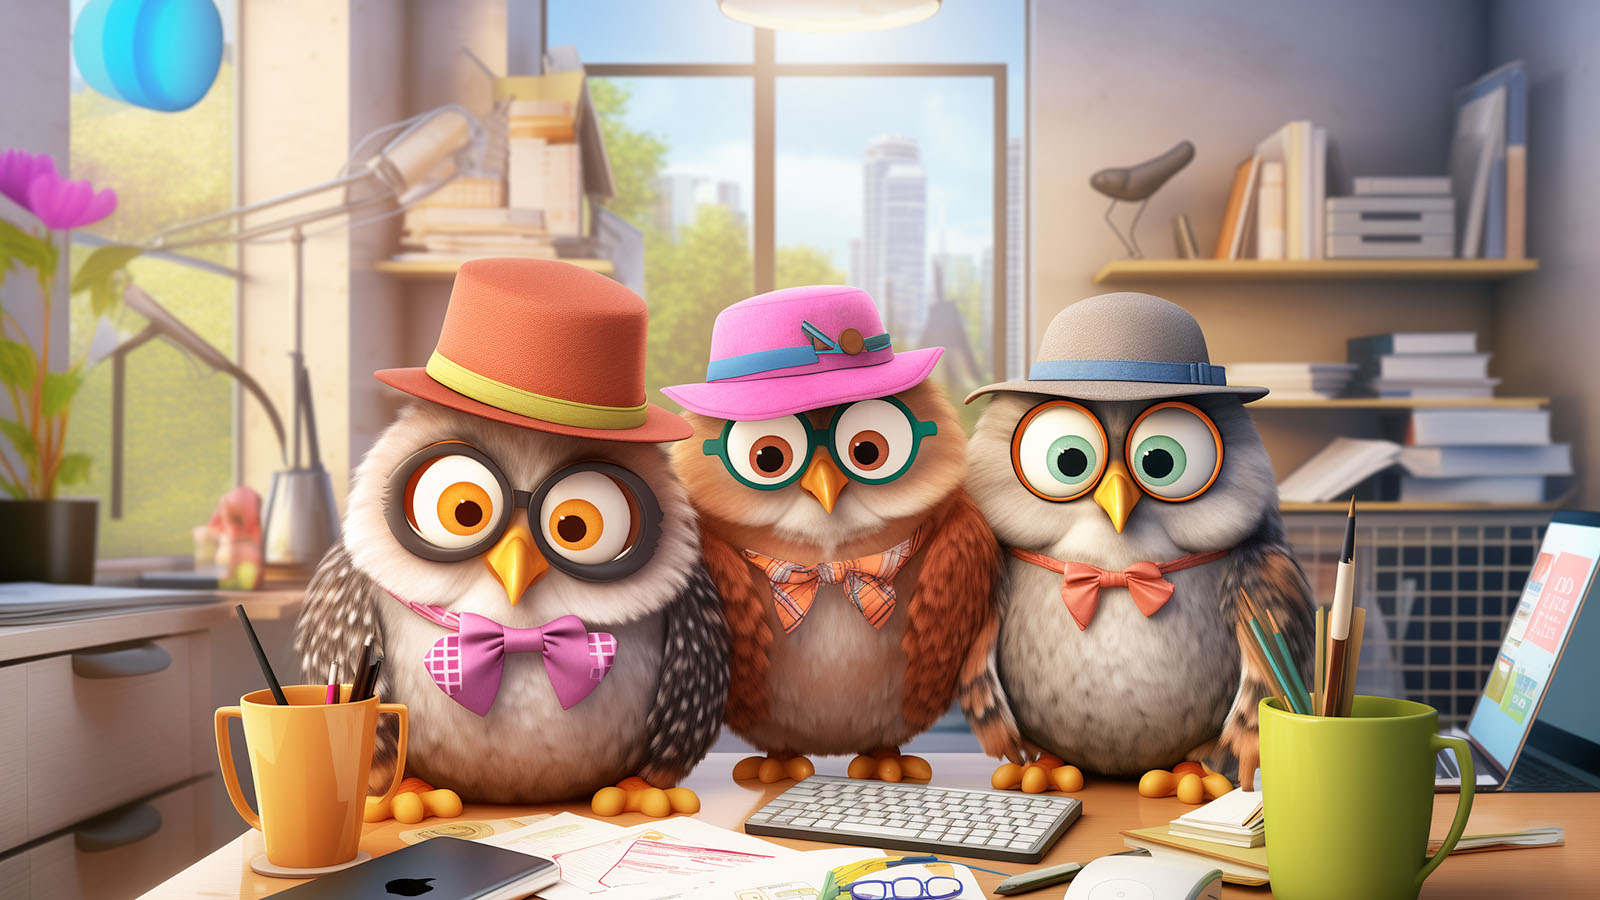 Marketing Wise cartoon owls in an office ready to help